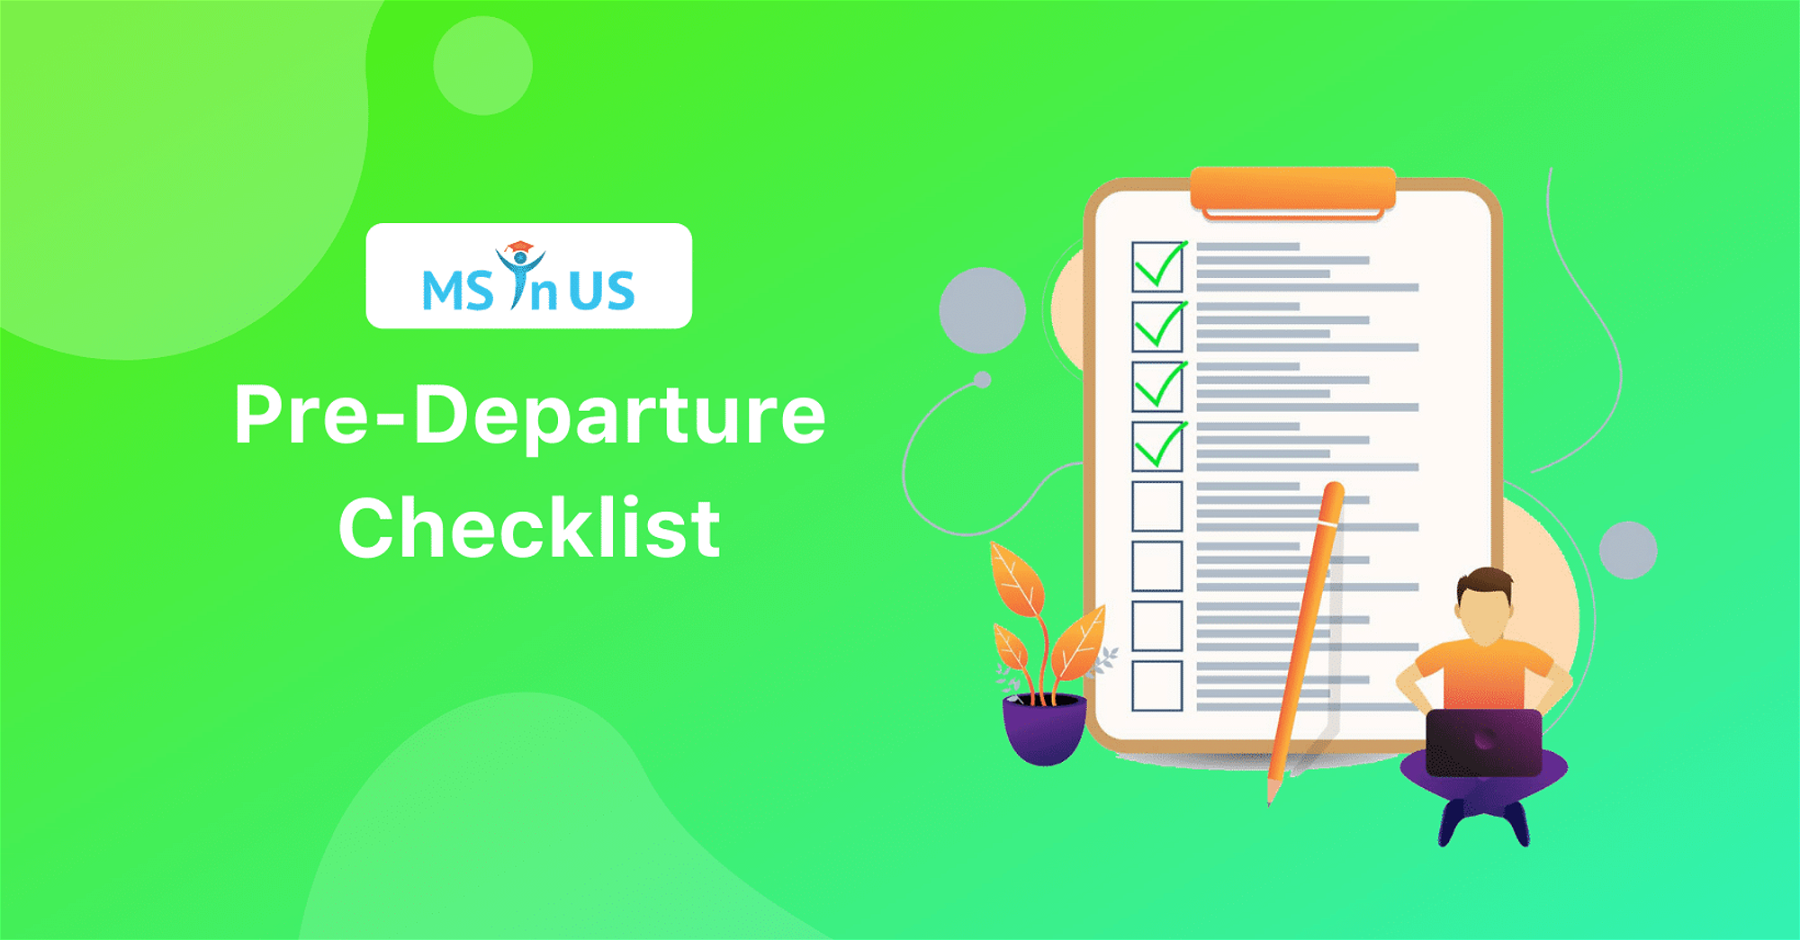 Comprehensive Pre-Departure Checklist for International Students Pursuing MS in the US